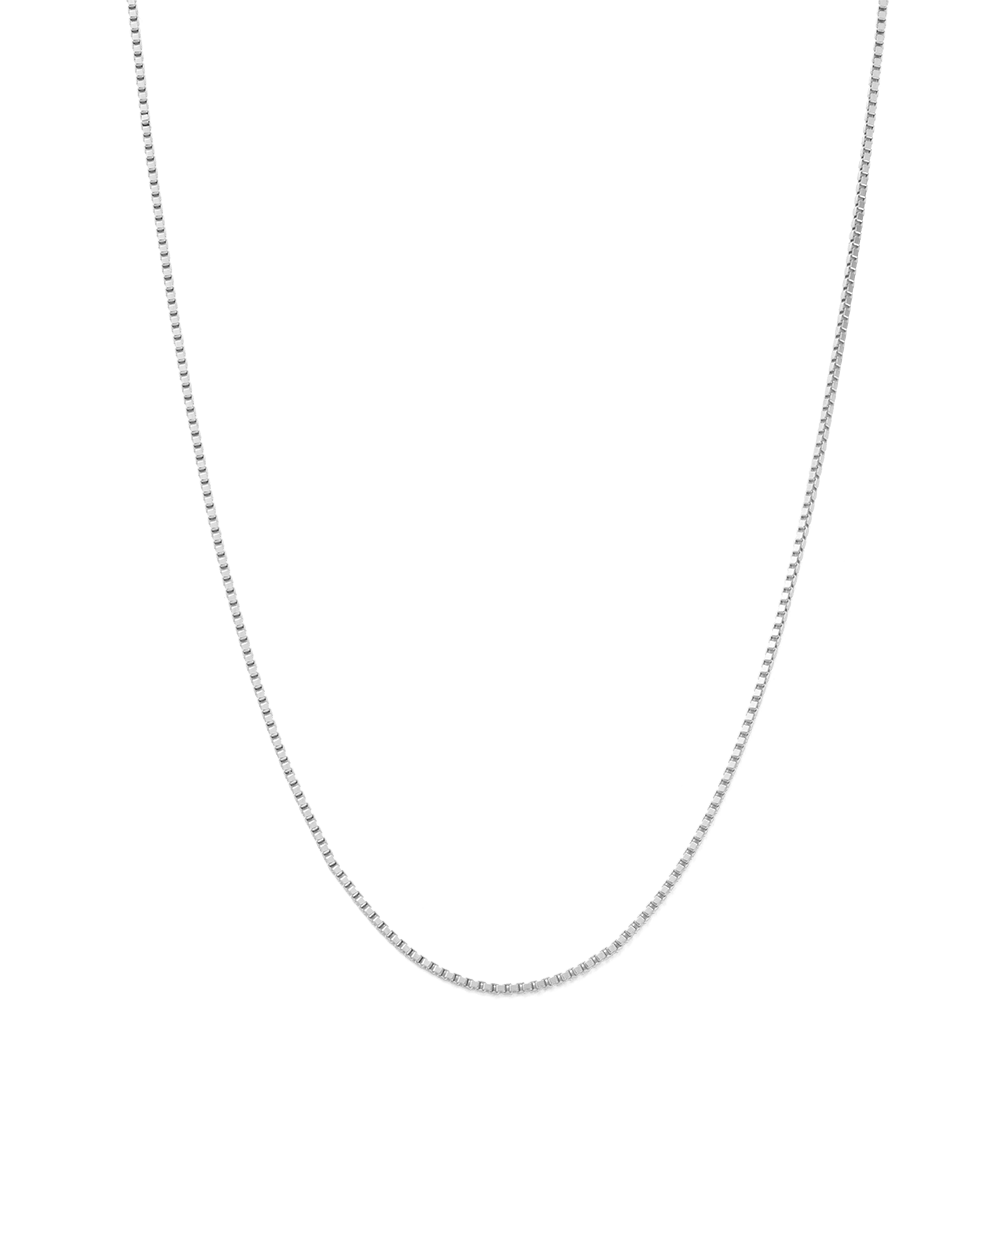 INTERTWINE CHAIN NECKLACE (STERLING SILVER) - IMAGE 1